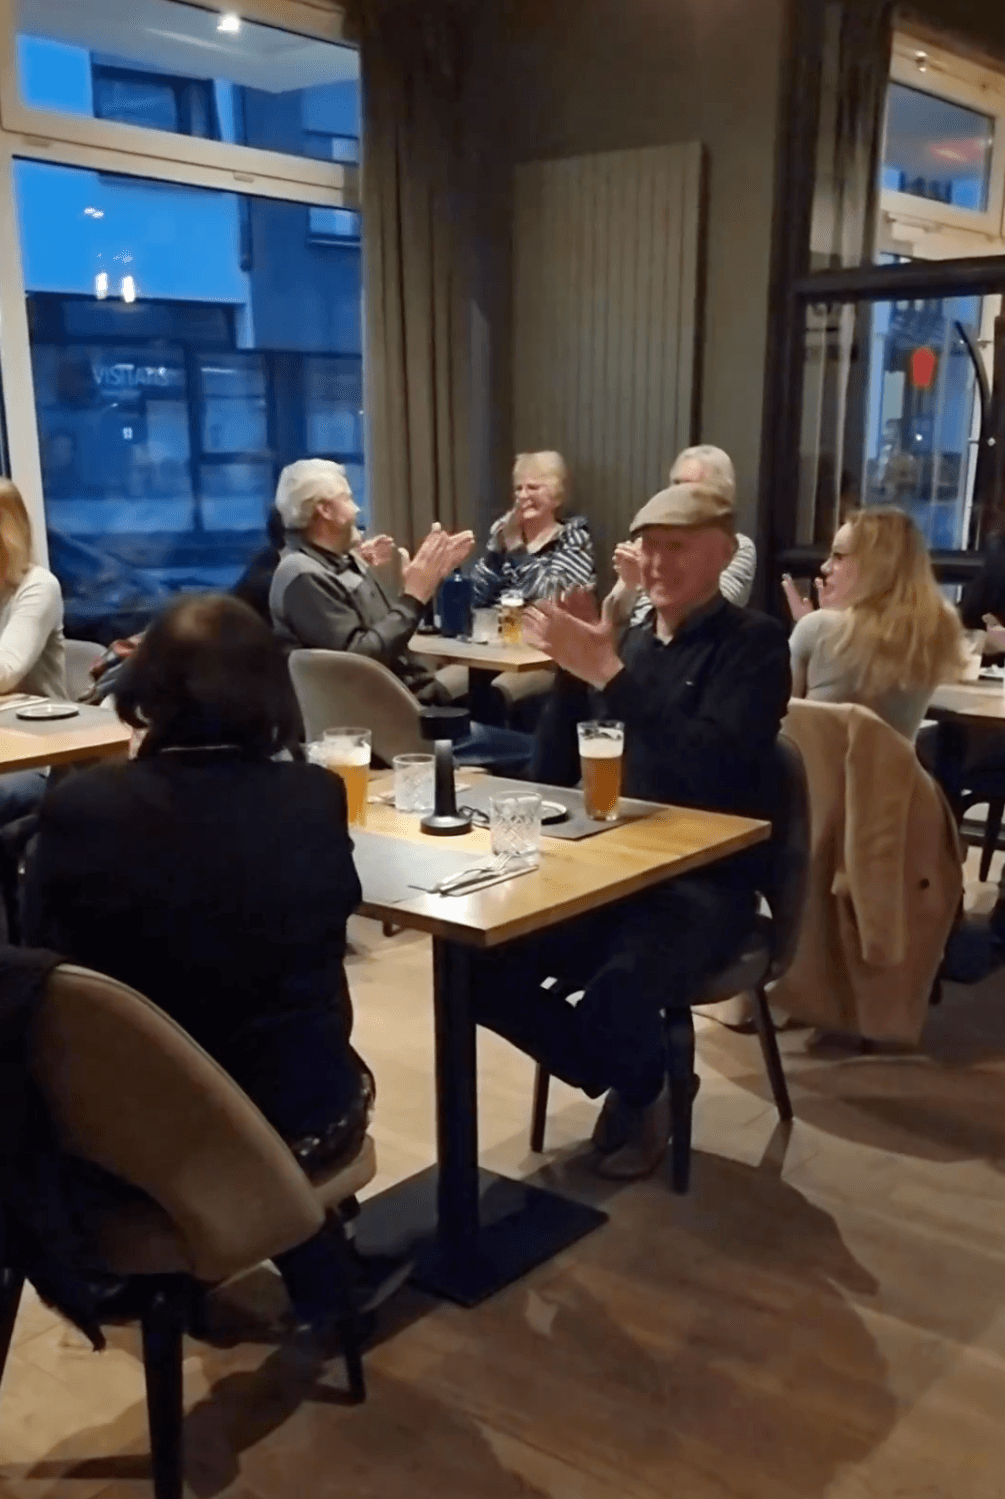 Diners at Rossi are surprised listening to Ricardo Marinello sing. (Courtesy of <a href="https://www.instagram.com/ricardomarinello_tenor/">Ricardo Marinello</a>)